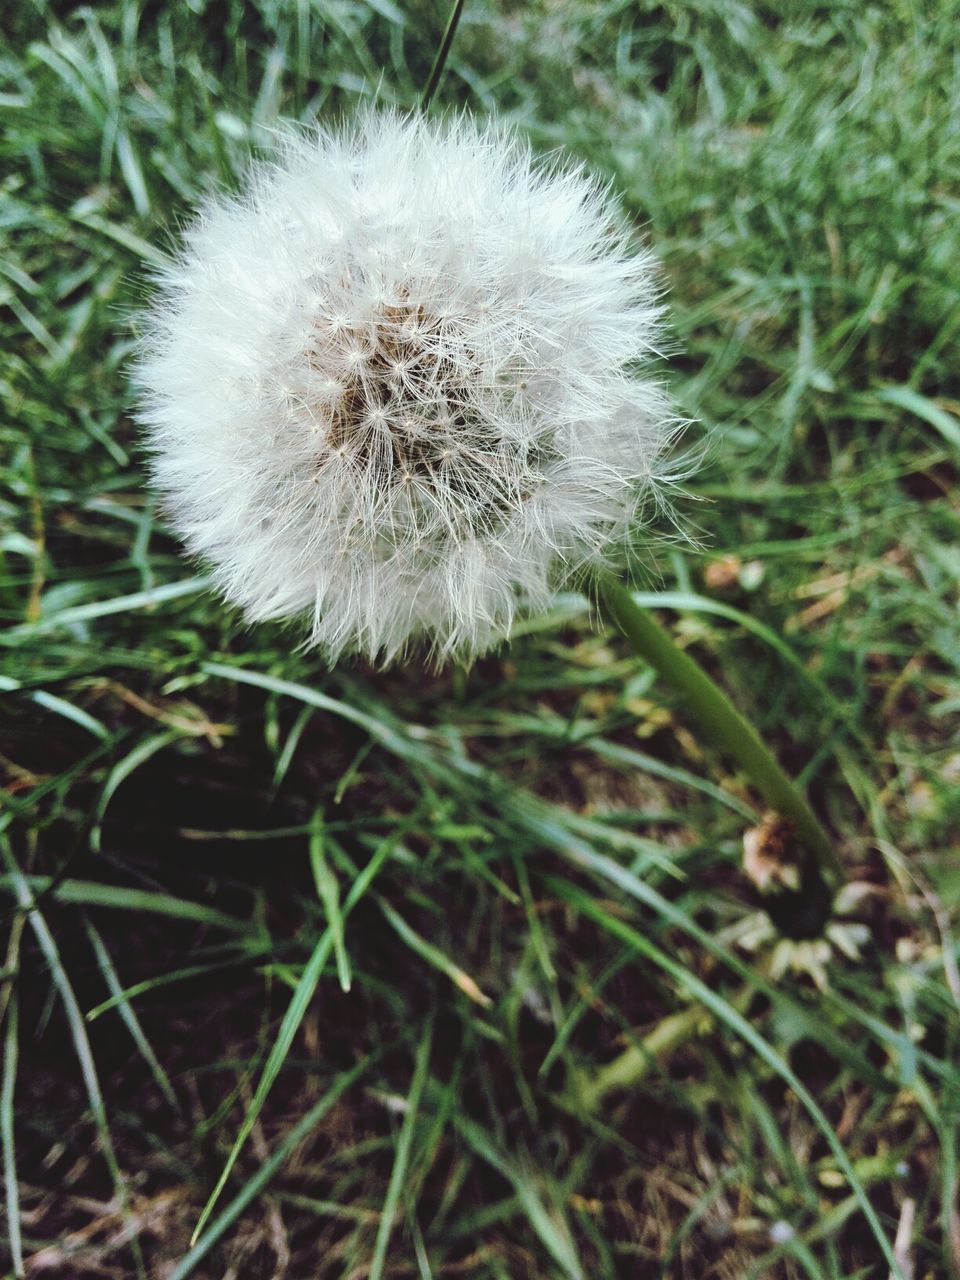 dandelion, flower, growth, fragility, freshness, nature, close-up, beauty in nature, flower head, white color, focus on foreground, plant, wildflower, softness, single flower, uncultivated, field, stem, outdoors, day